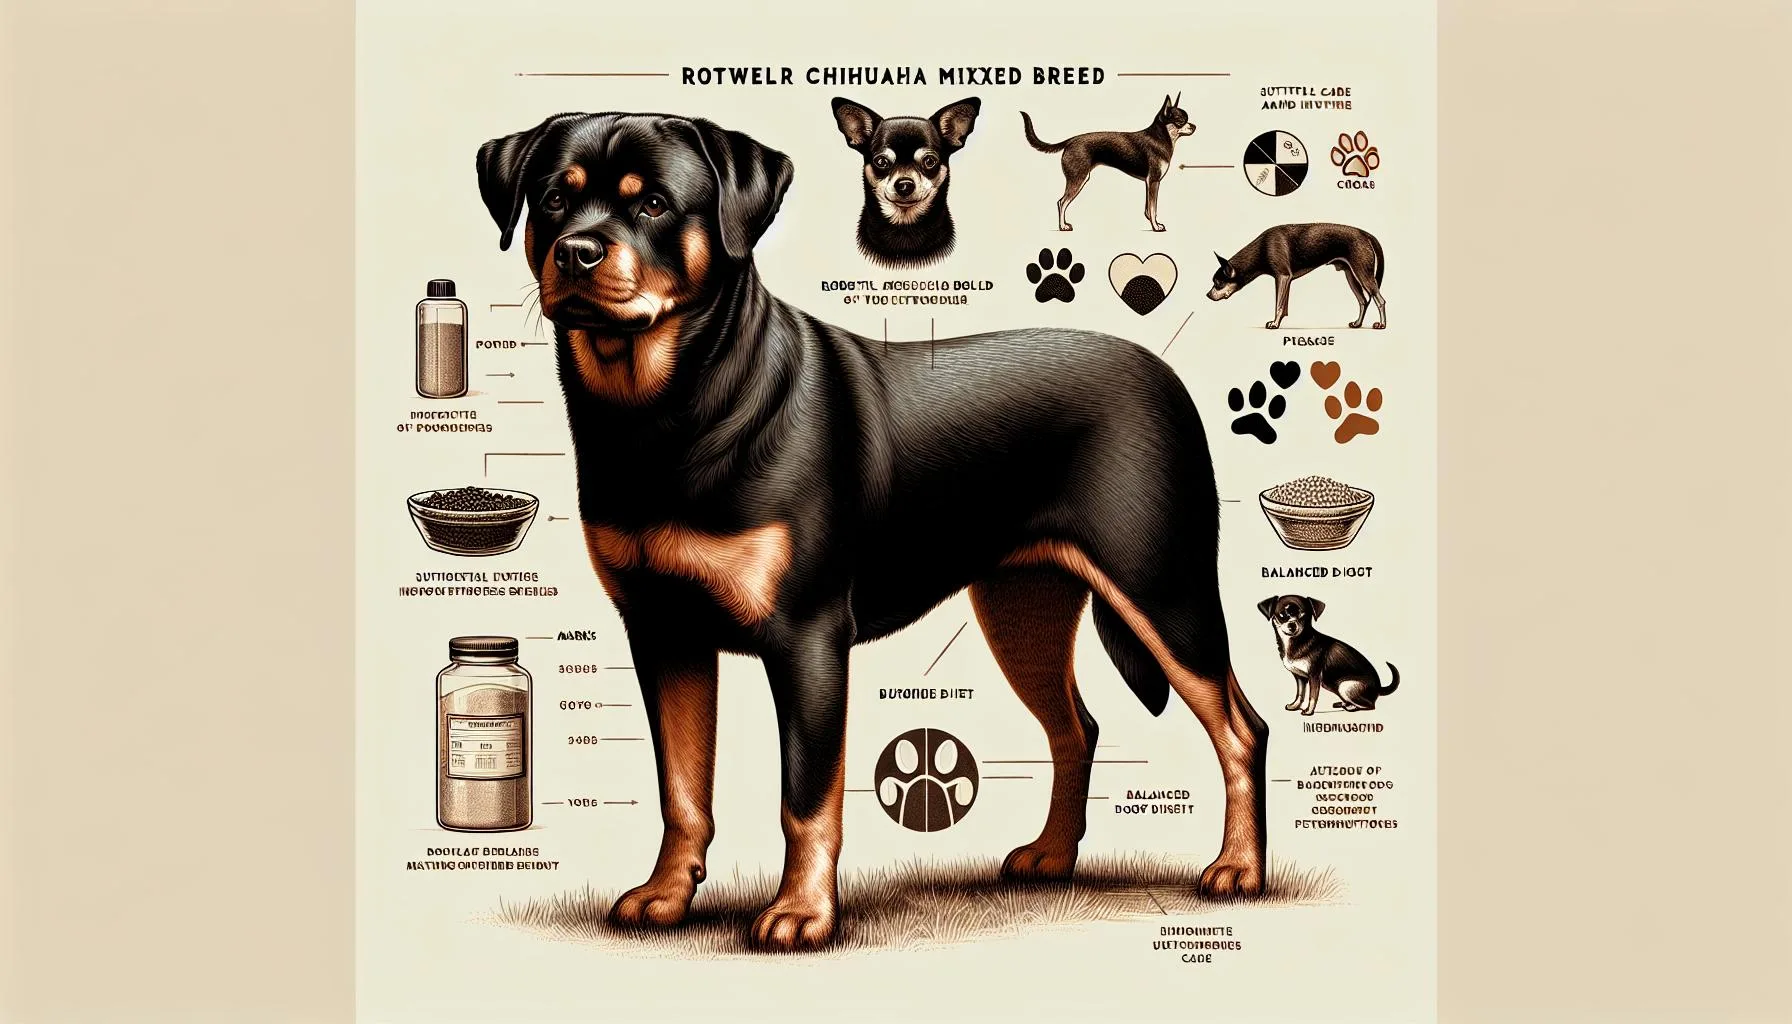 Rottweiler Chihuahua Mix Full Grown: Guide to a Happy Dog!